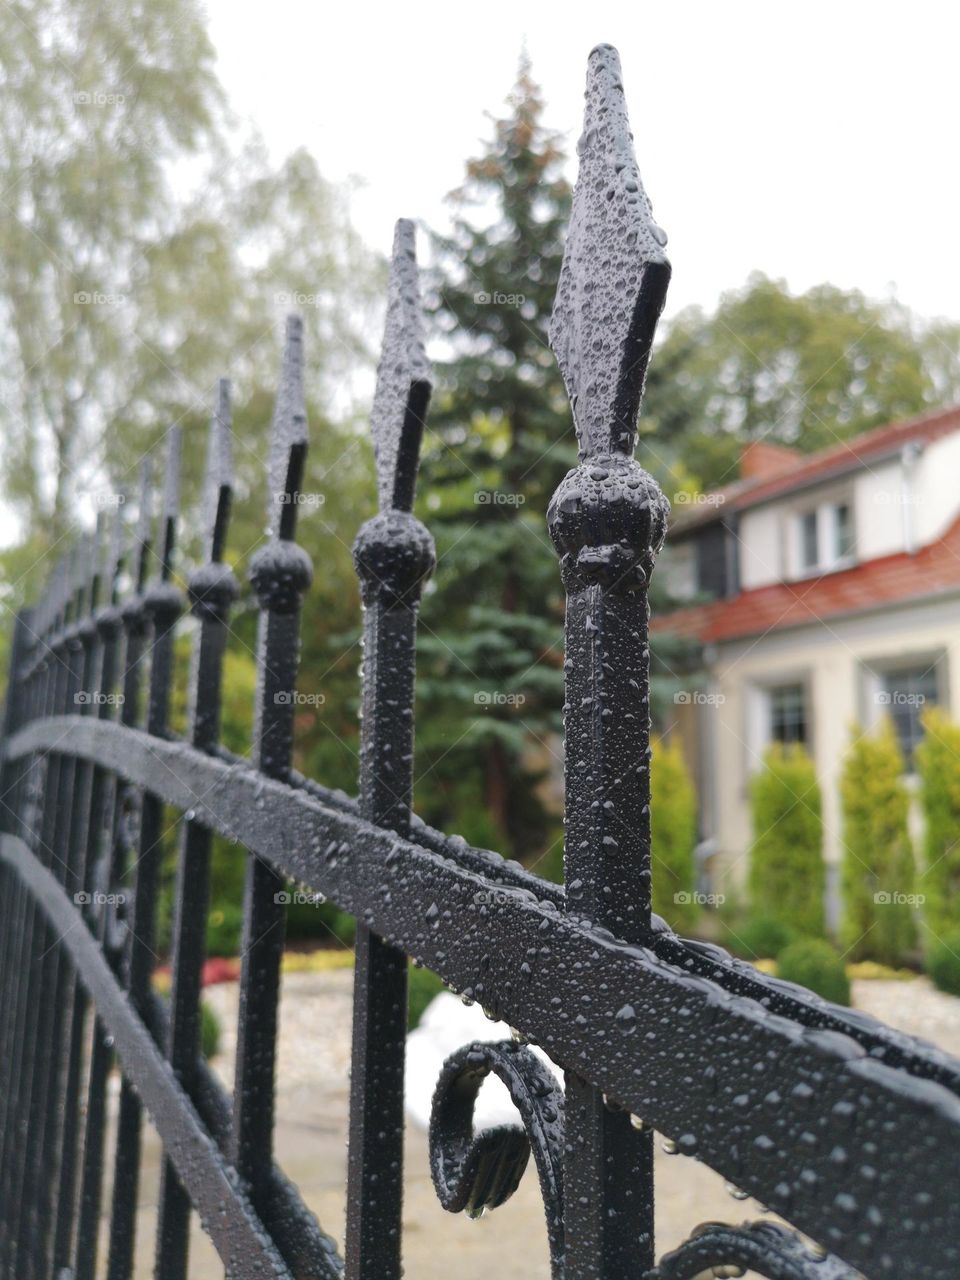 A wrought-iron fence in the rainy drops